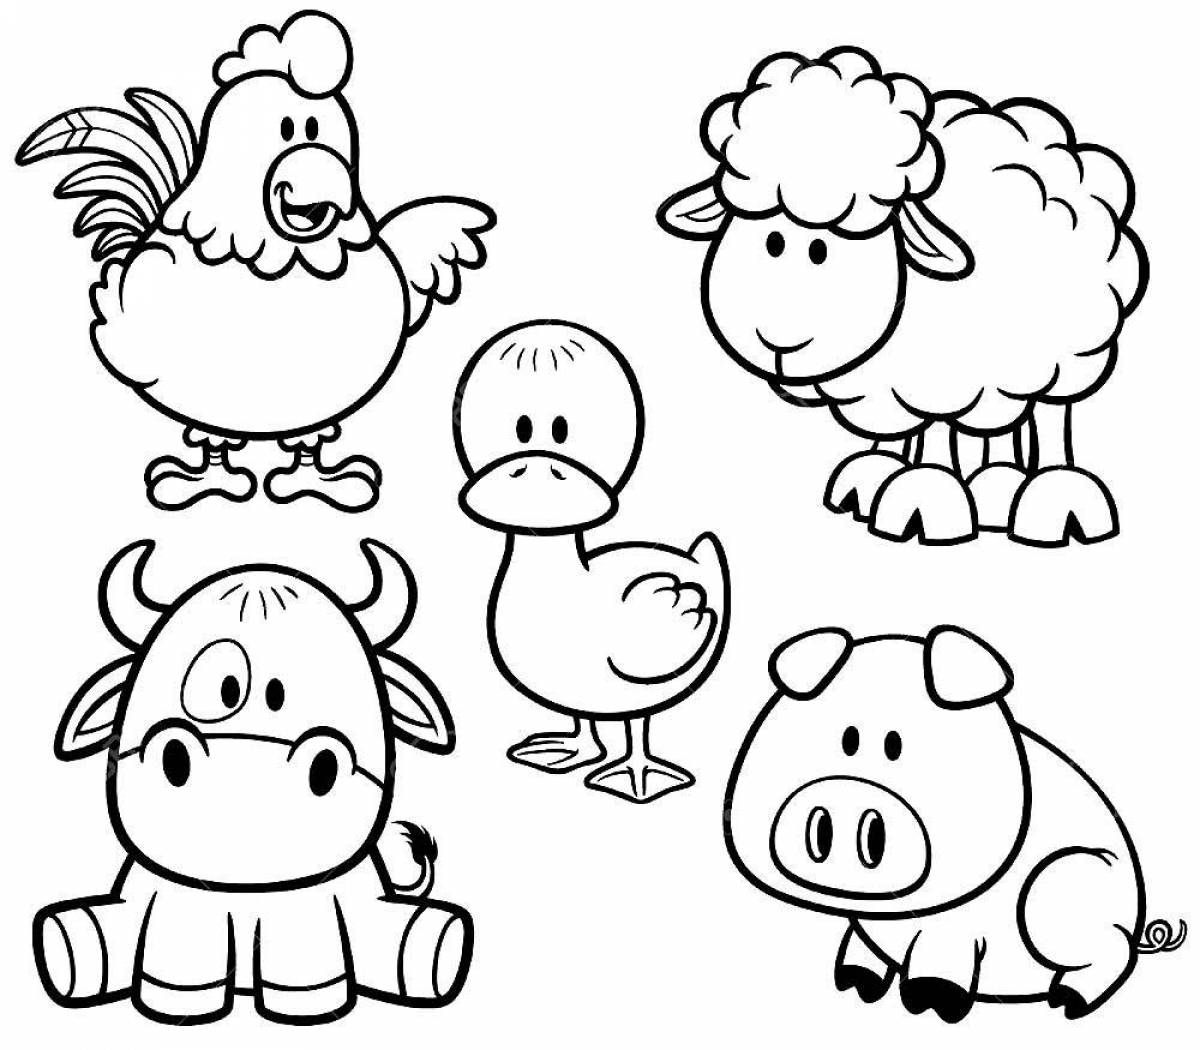 Curious pet coloring pages for kids